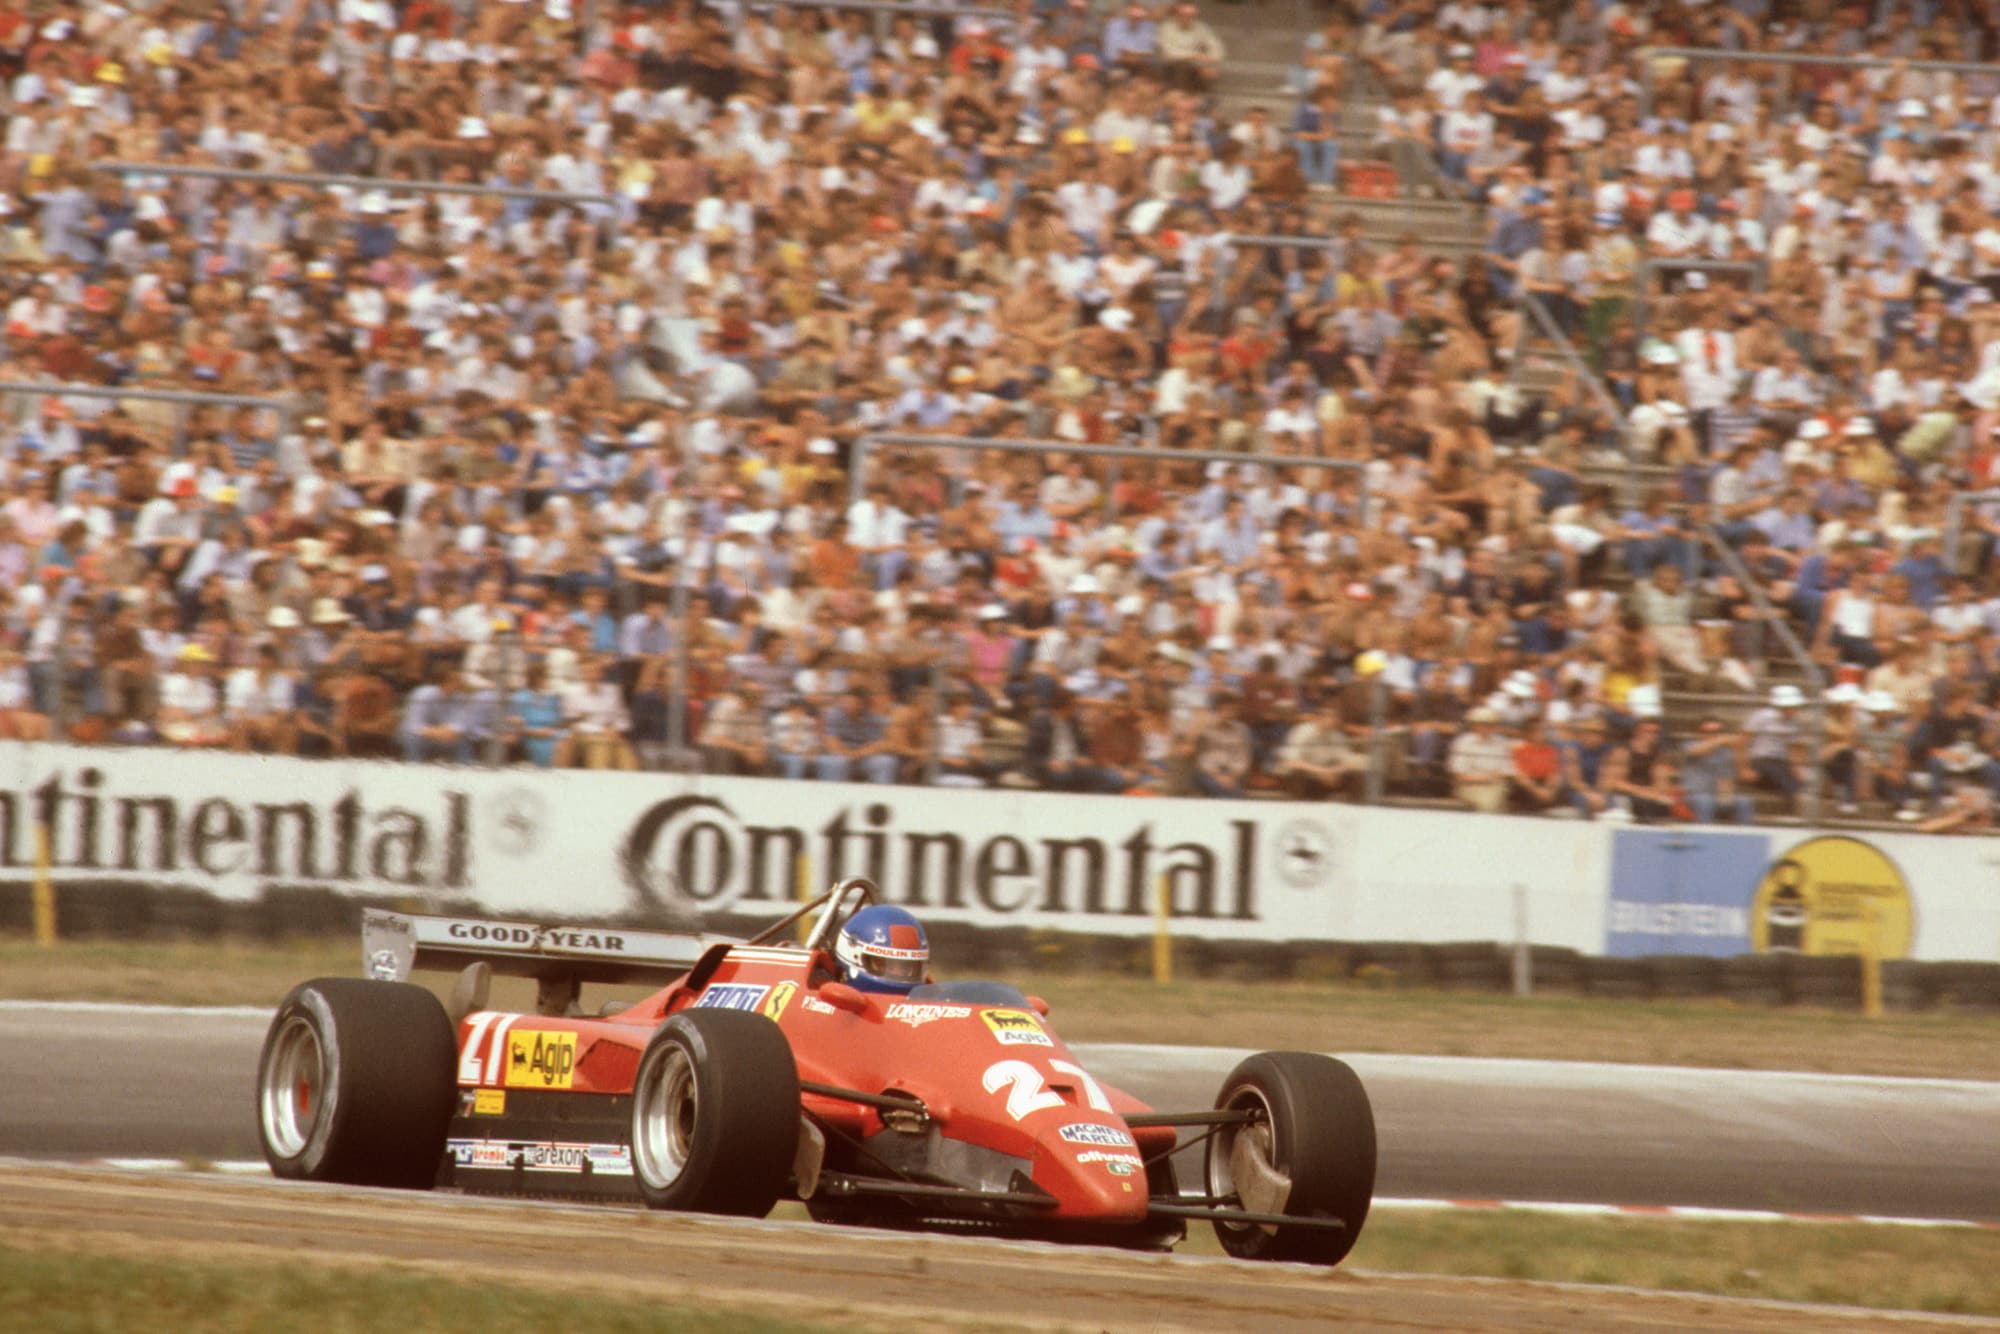 Patrick Tambay at the wheel of the Ferrari 126 C2 during the 1982 German Grand Prix which he went on to win